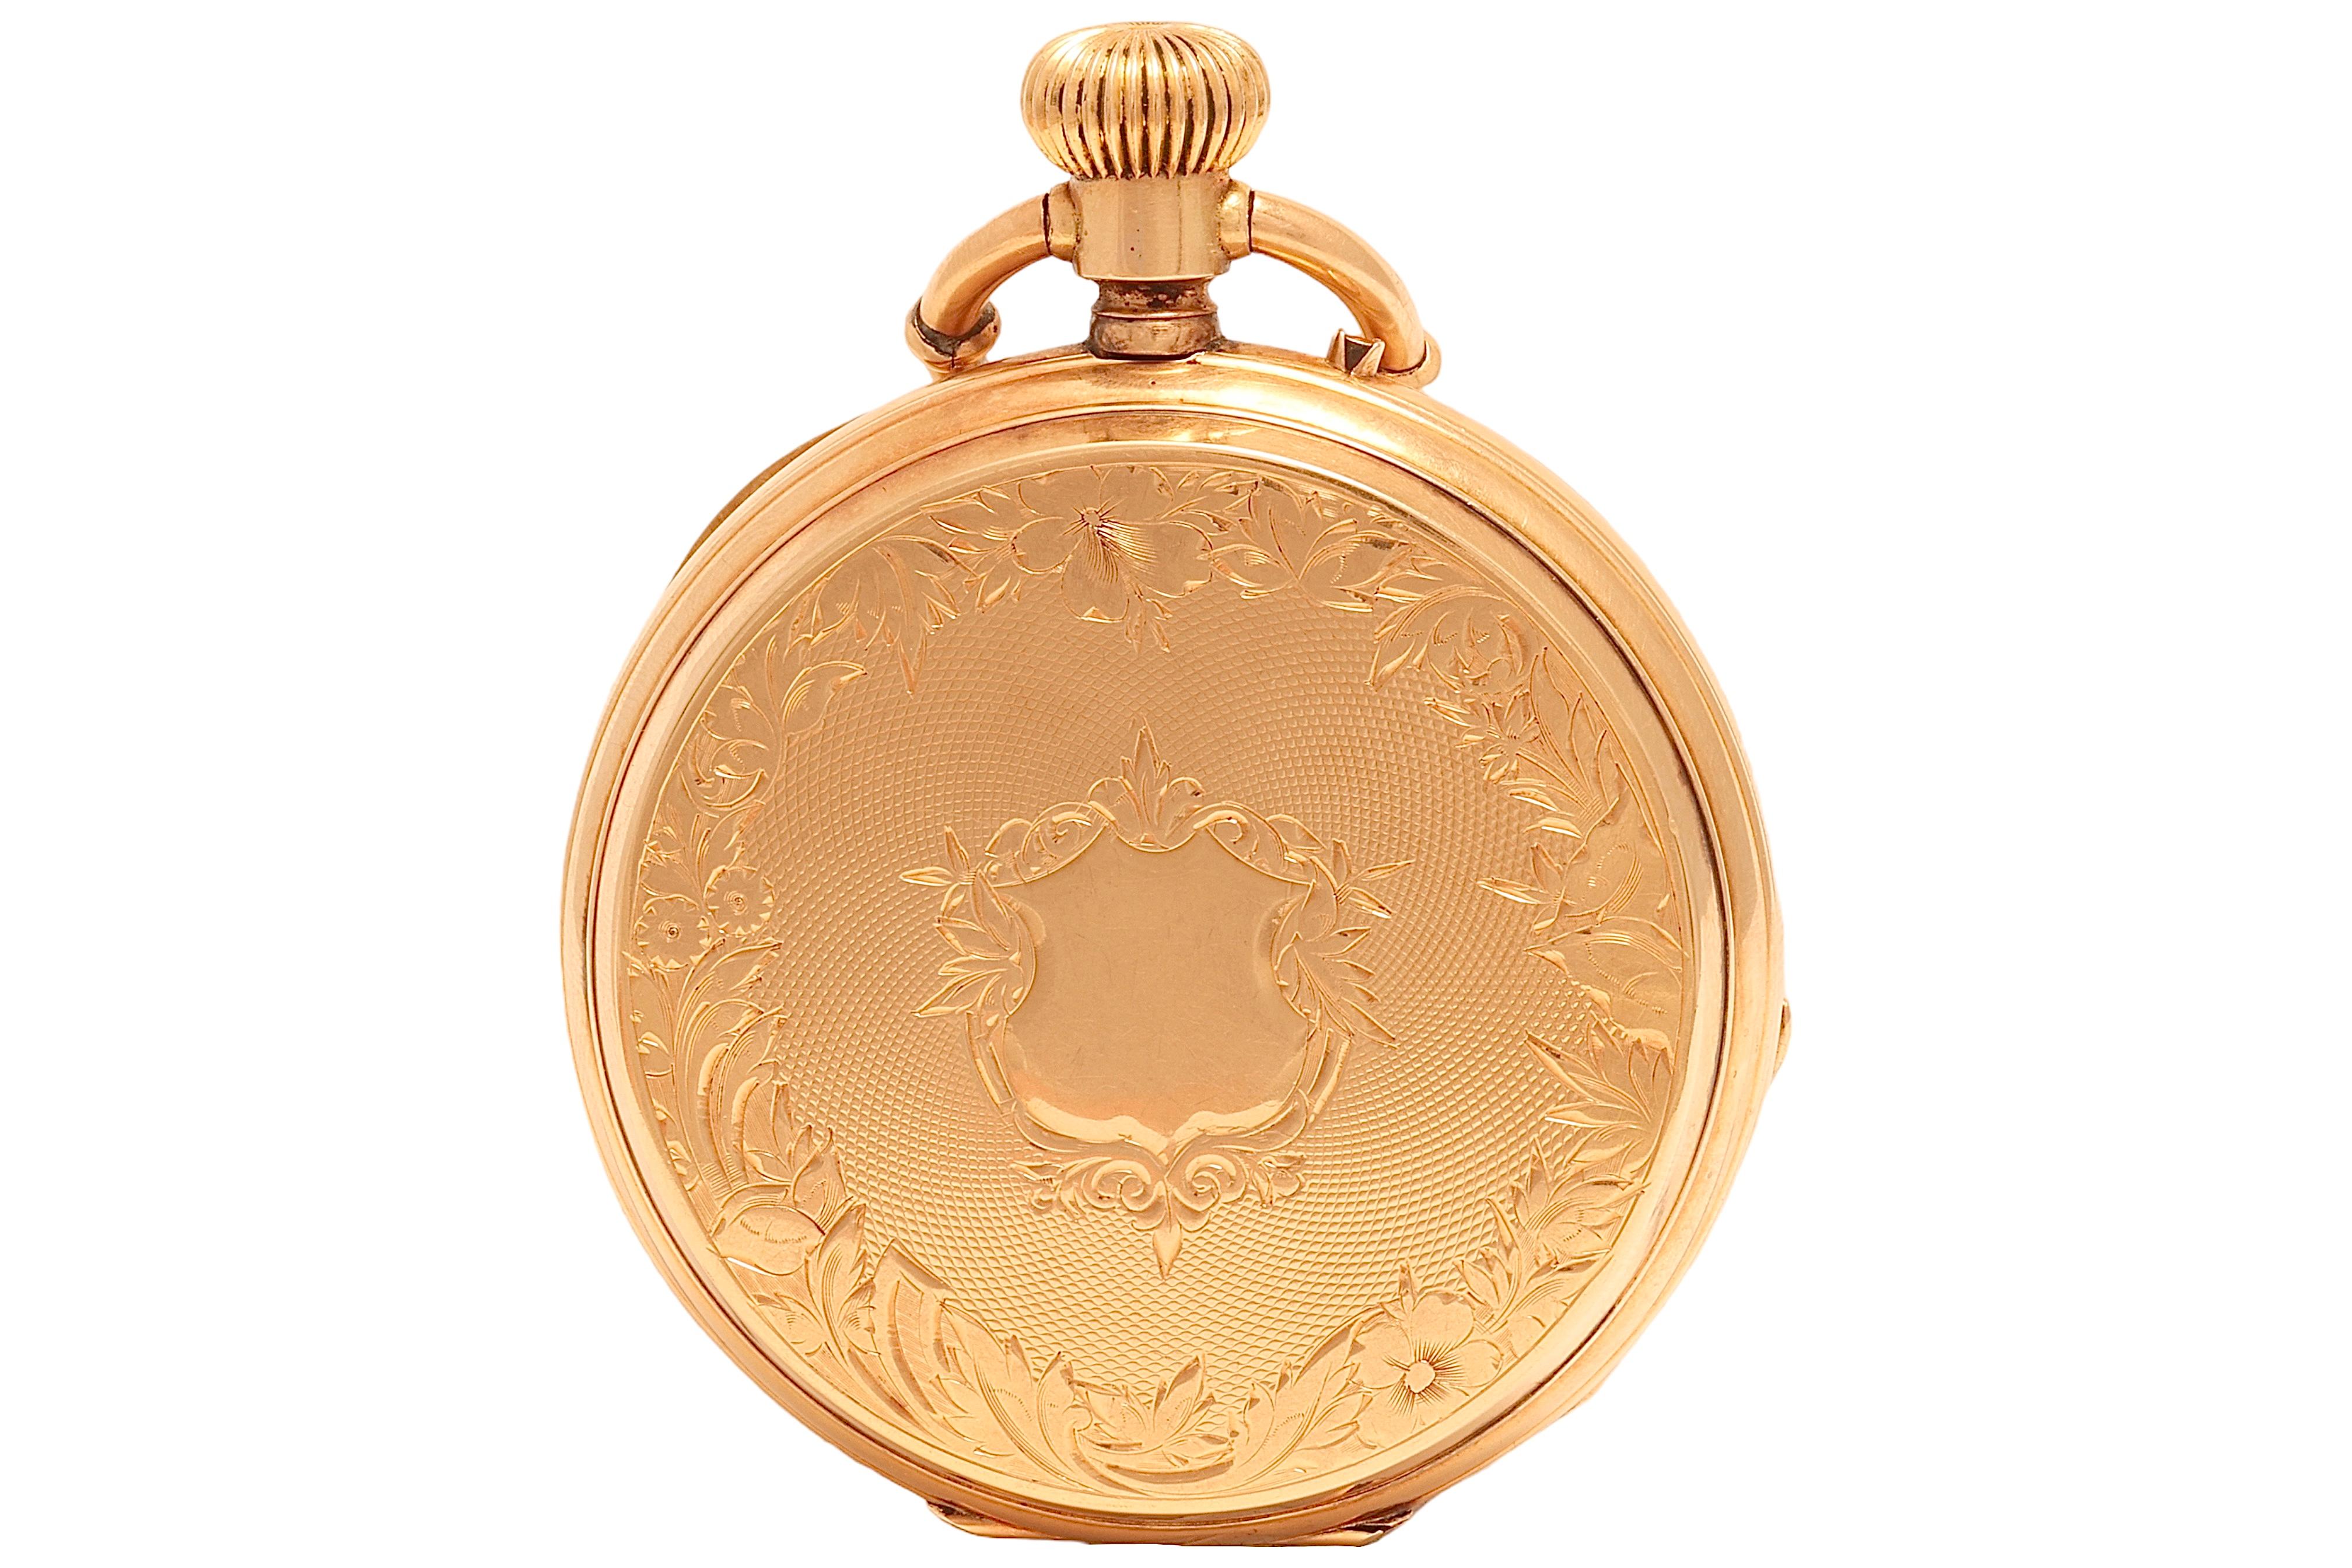 14 Kt Solid Gold Heavy Hunter Case Manual Winding Pocket Watch 

Poids : 97,4 grammes
